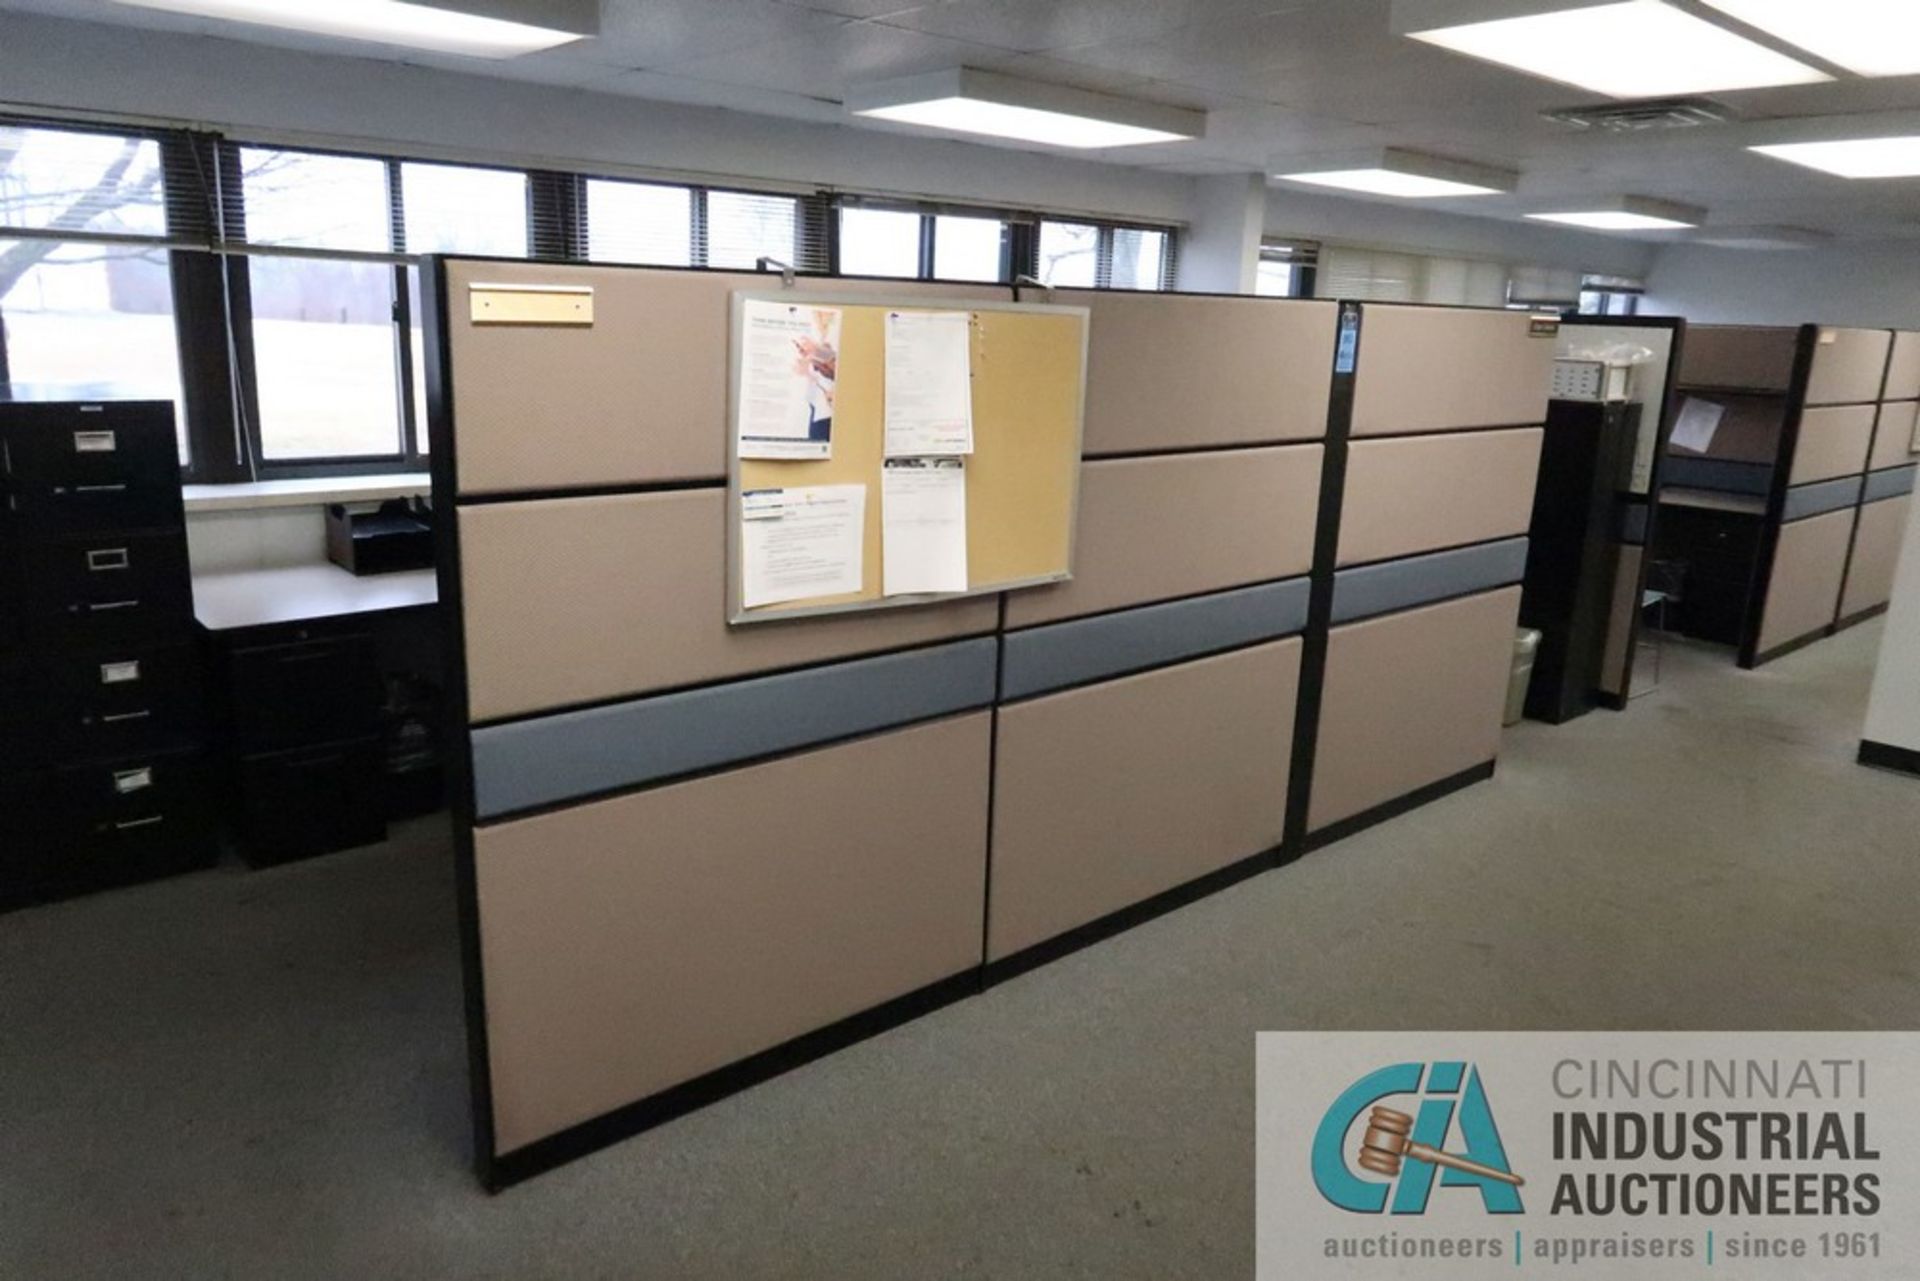 (LOT) (4) CUBICLES, 96" X 96" L-SHAPED DESKS, (4) EXECUTIVE CHAIRS, (3) SIDE CHAIRS, FILE CABINETS